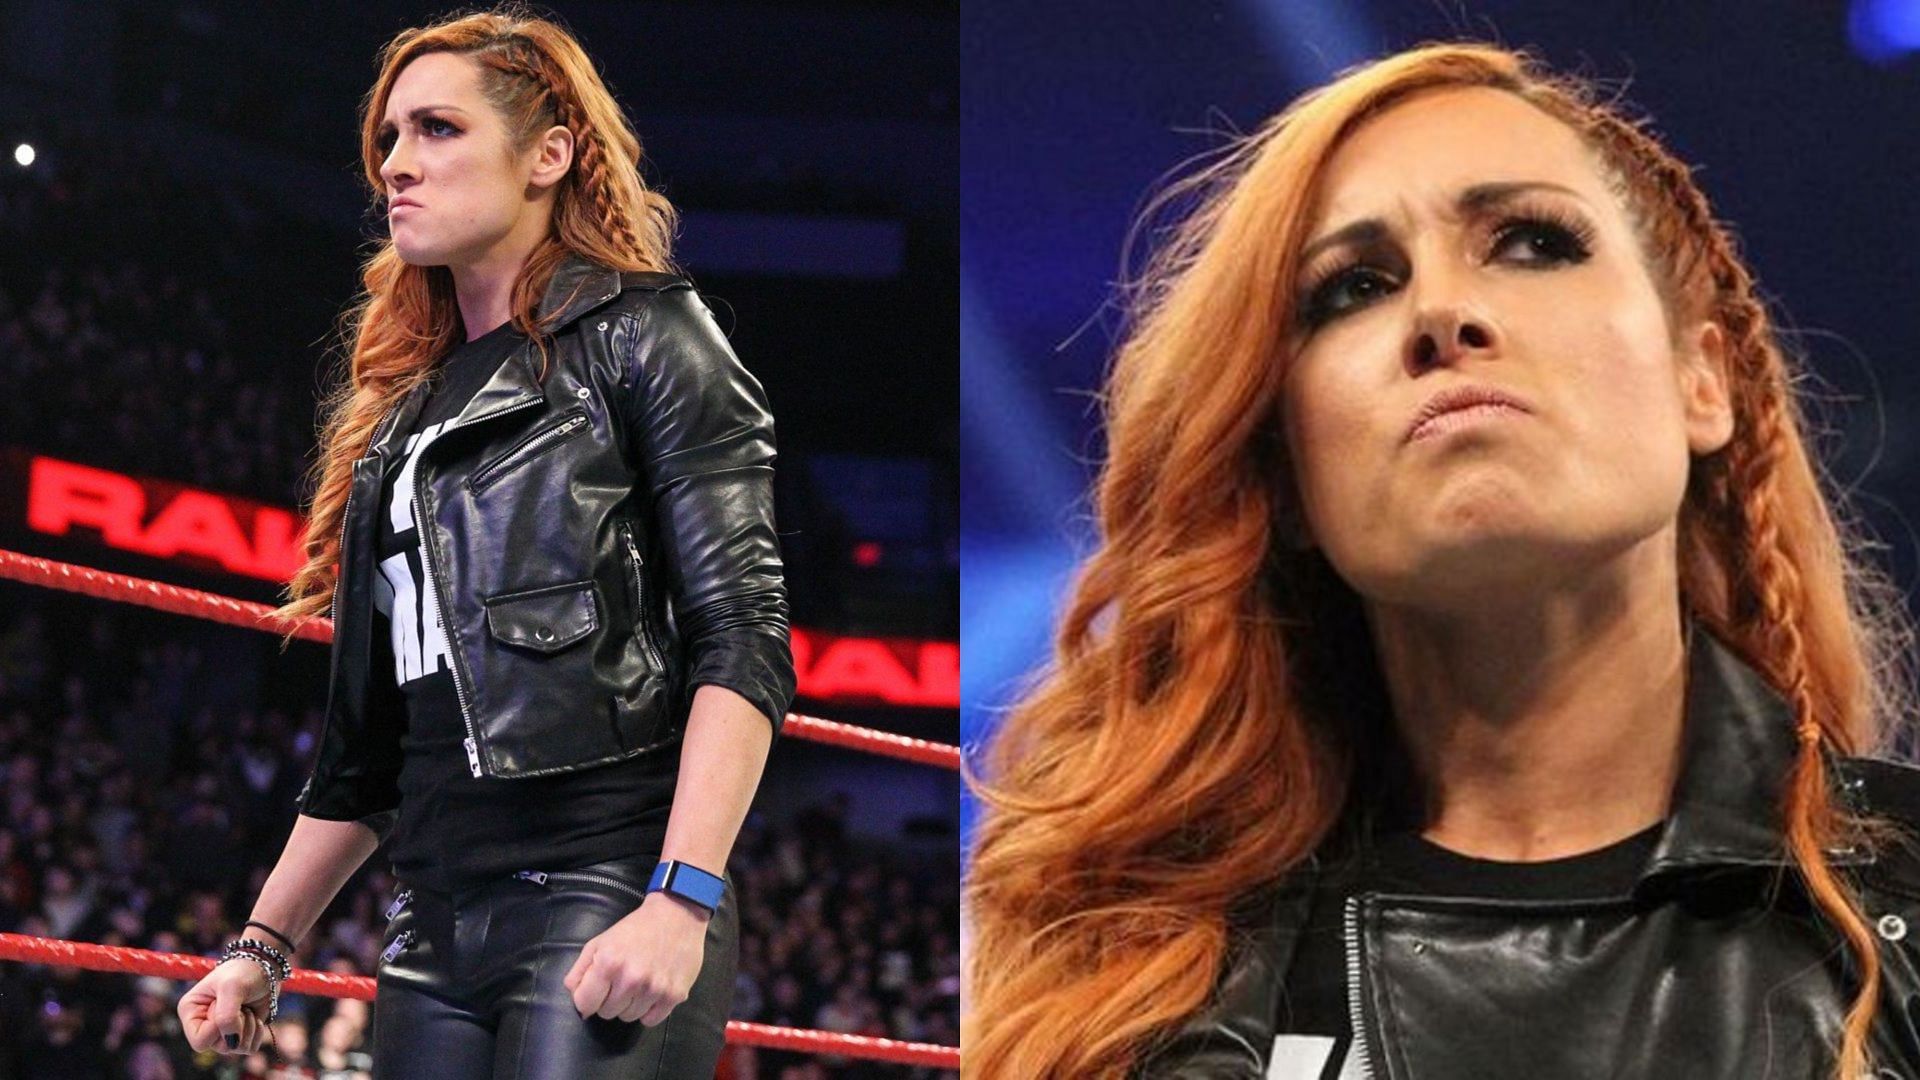 Becky Lynch is currently feuding with WWE Hall of Famer Trish Stratus